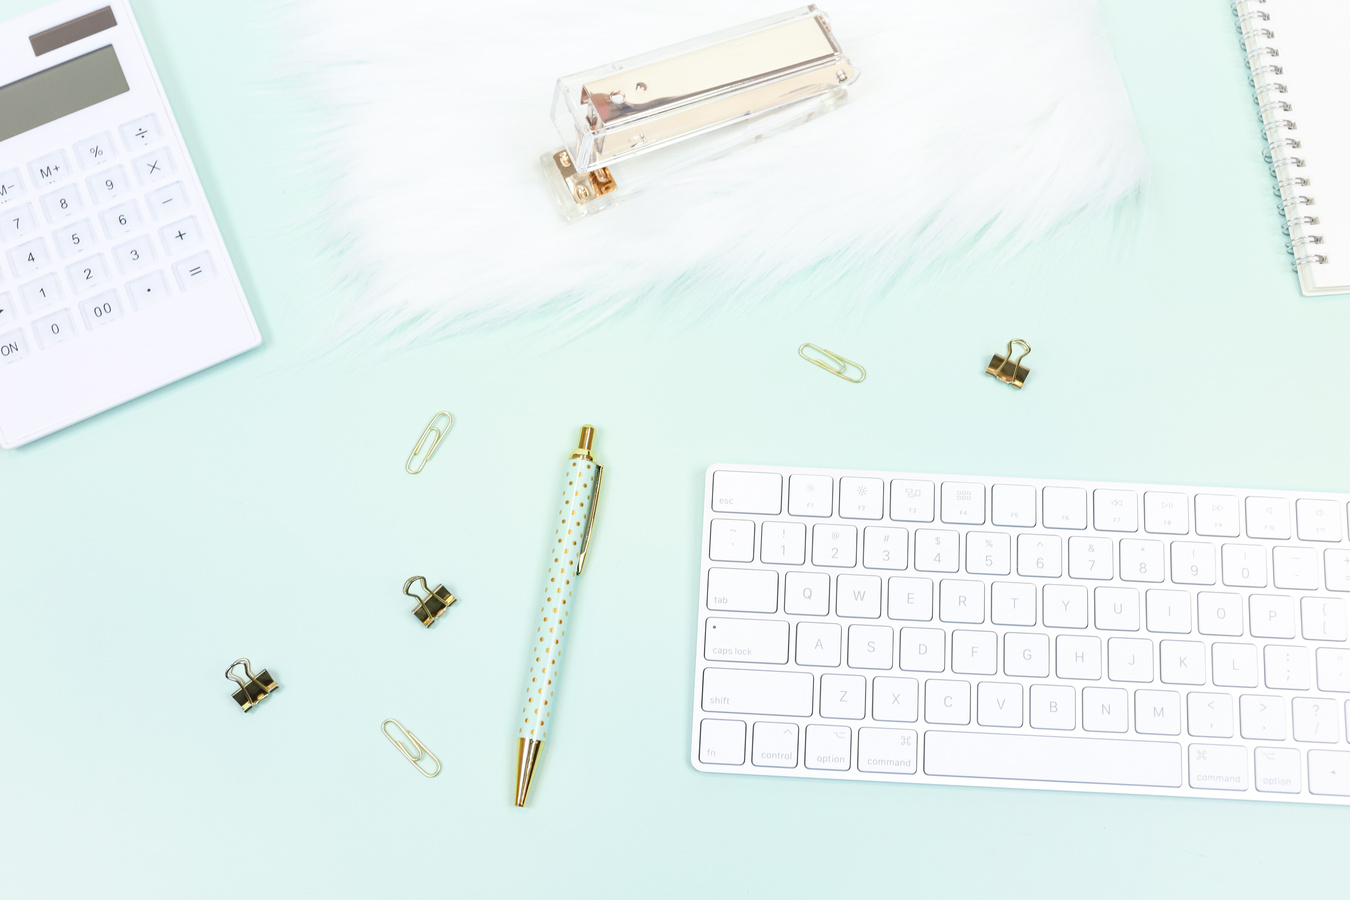 Keyboard and Office Supplies on Mint Background